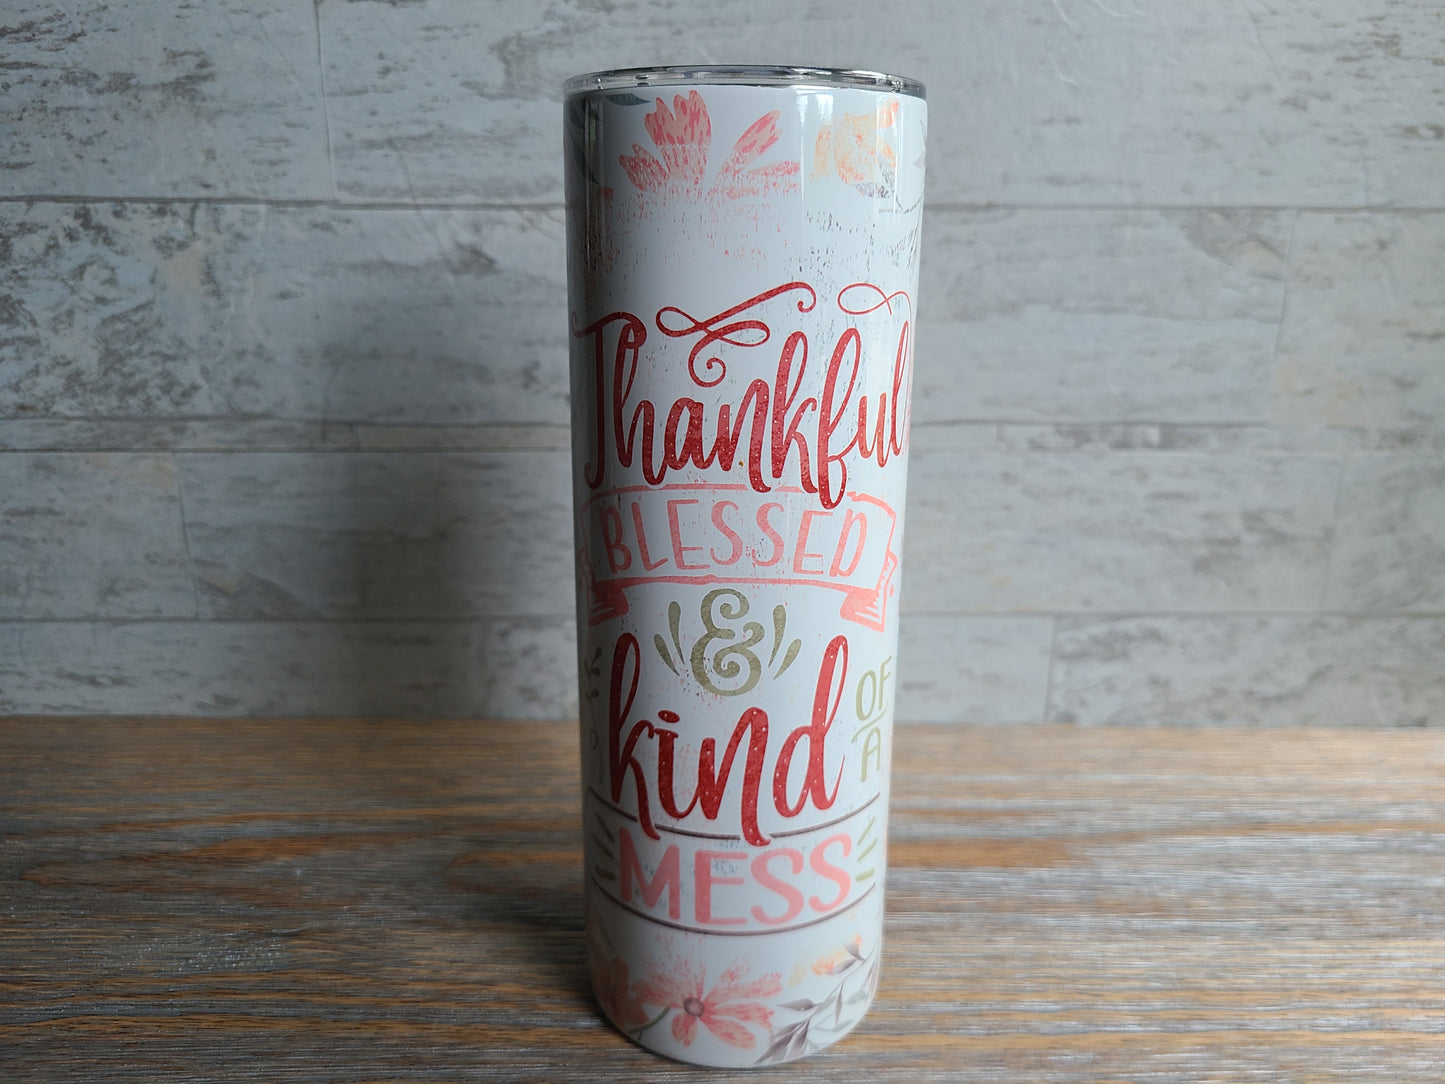 Thankful Blessed and Kind of a Mess Skinny Tumbler